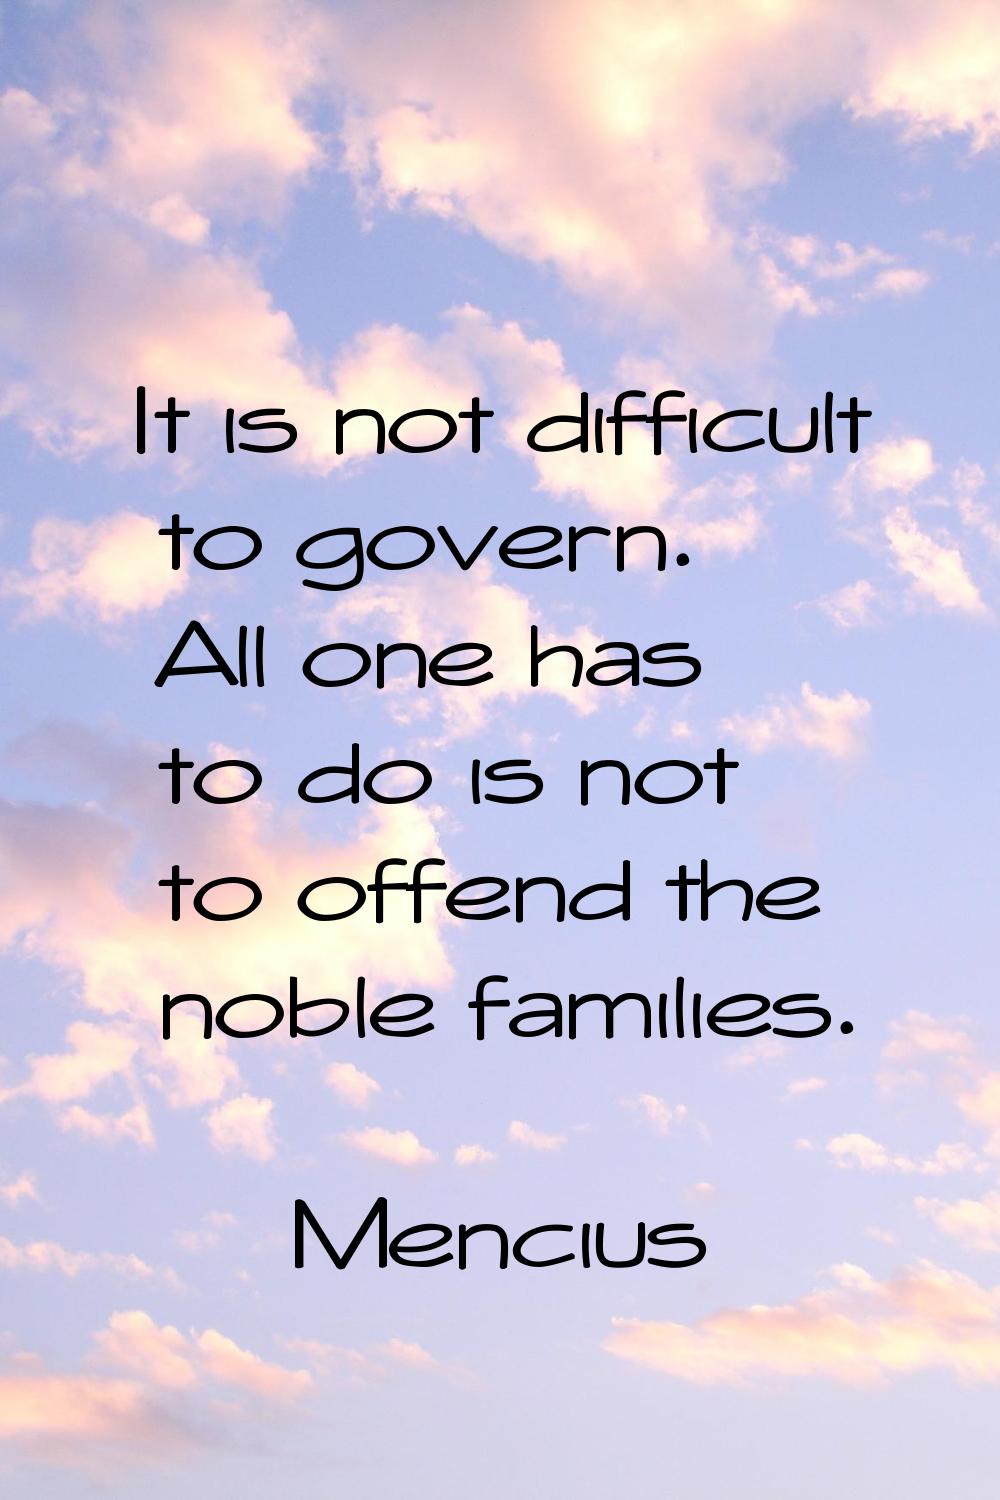 It is not difficult to govern. All one has to do is not to offend the noble families.